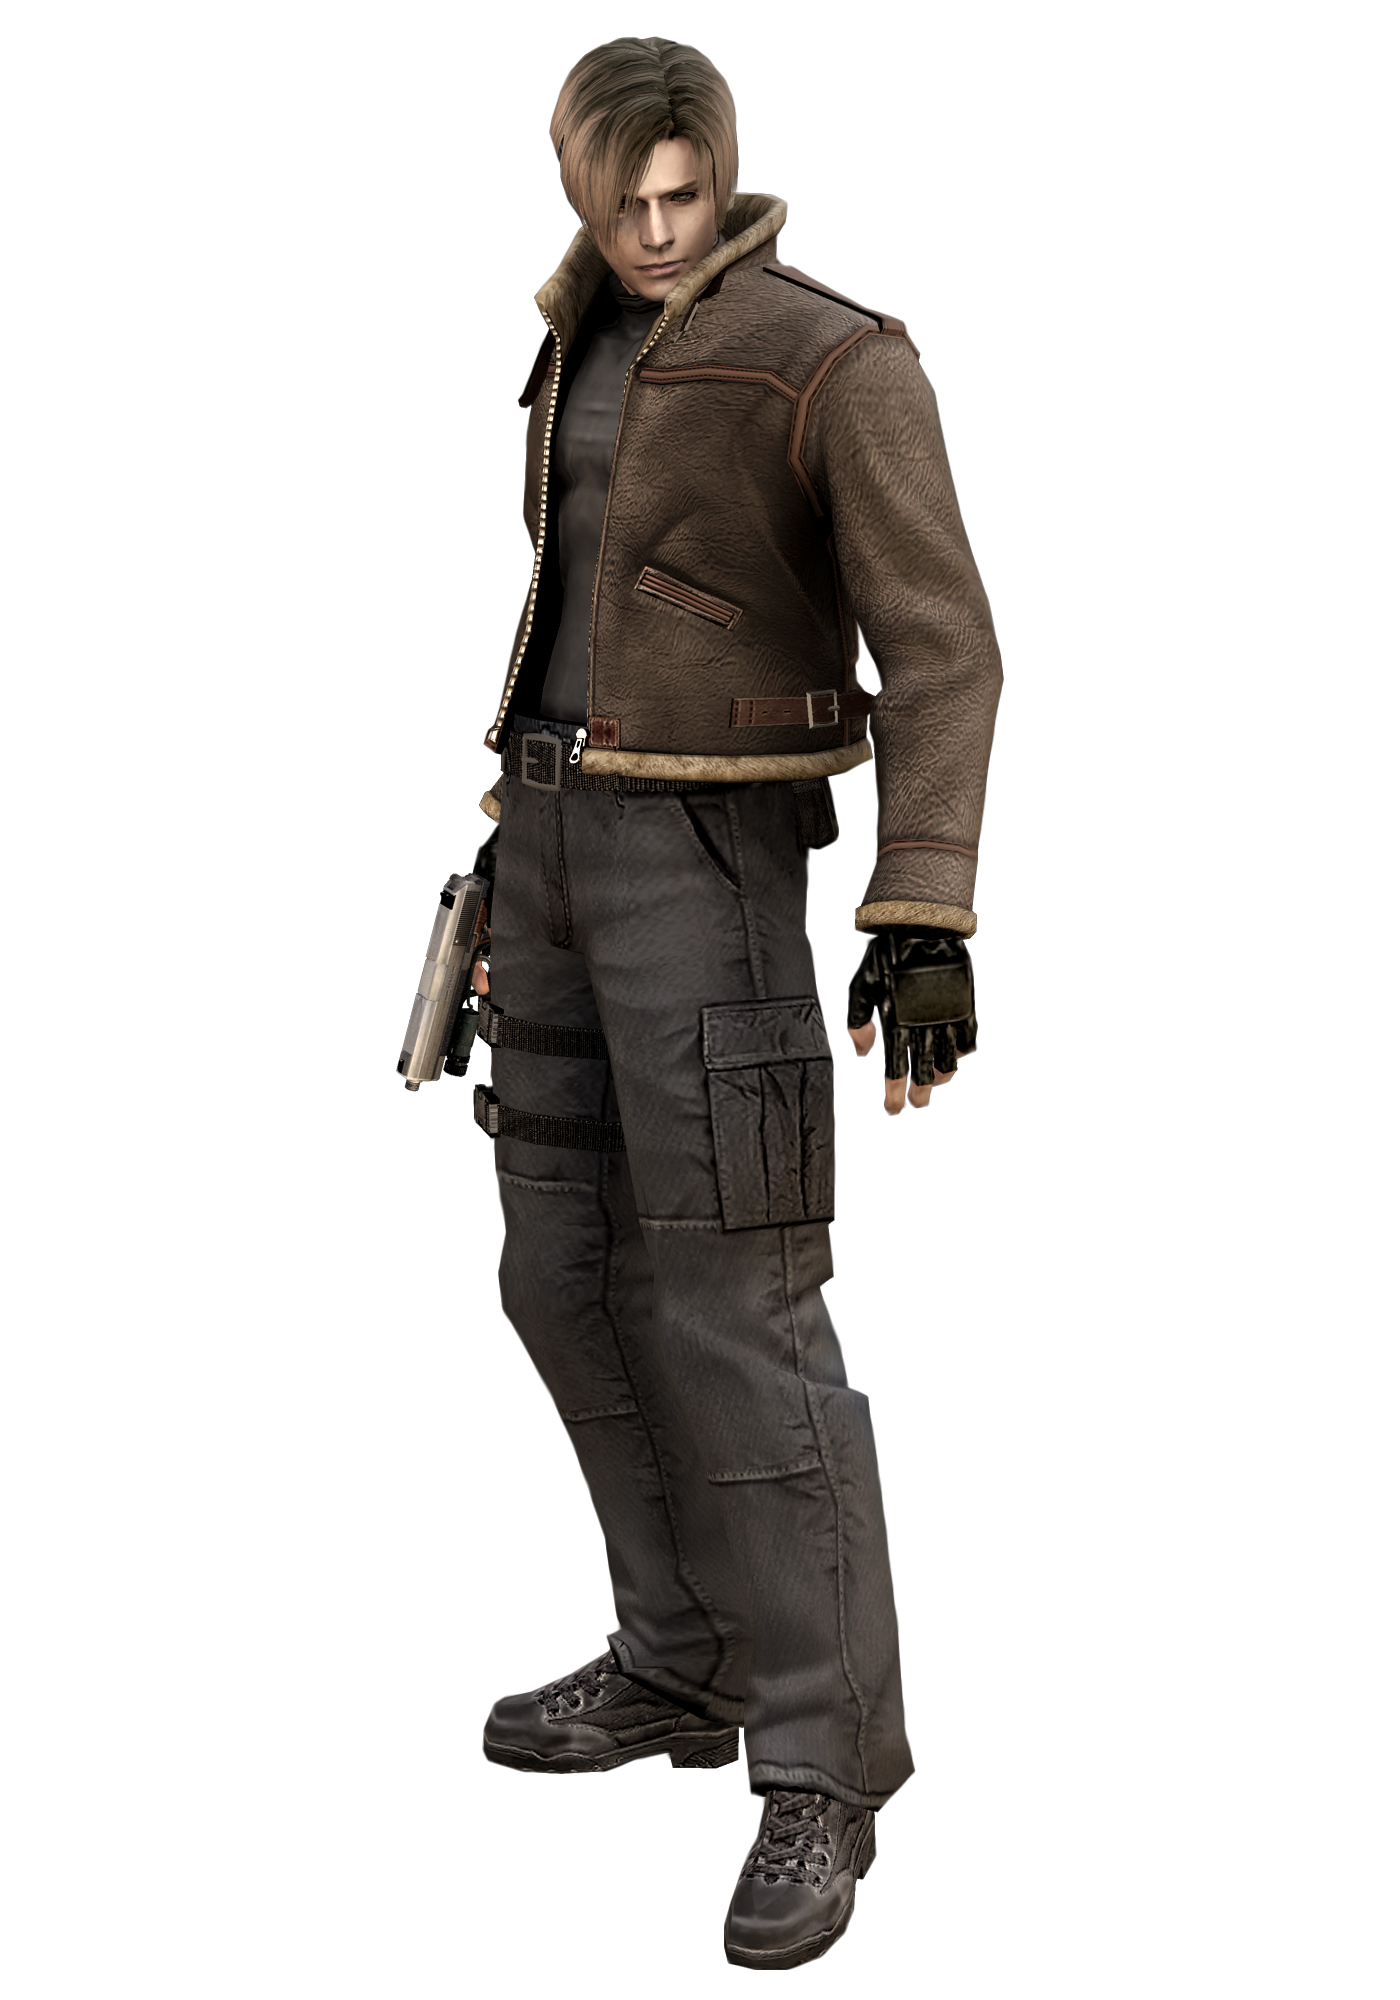 Leon S. Kennedy PNG High-Quality Image